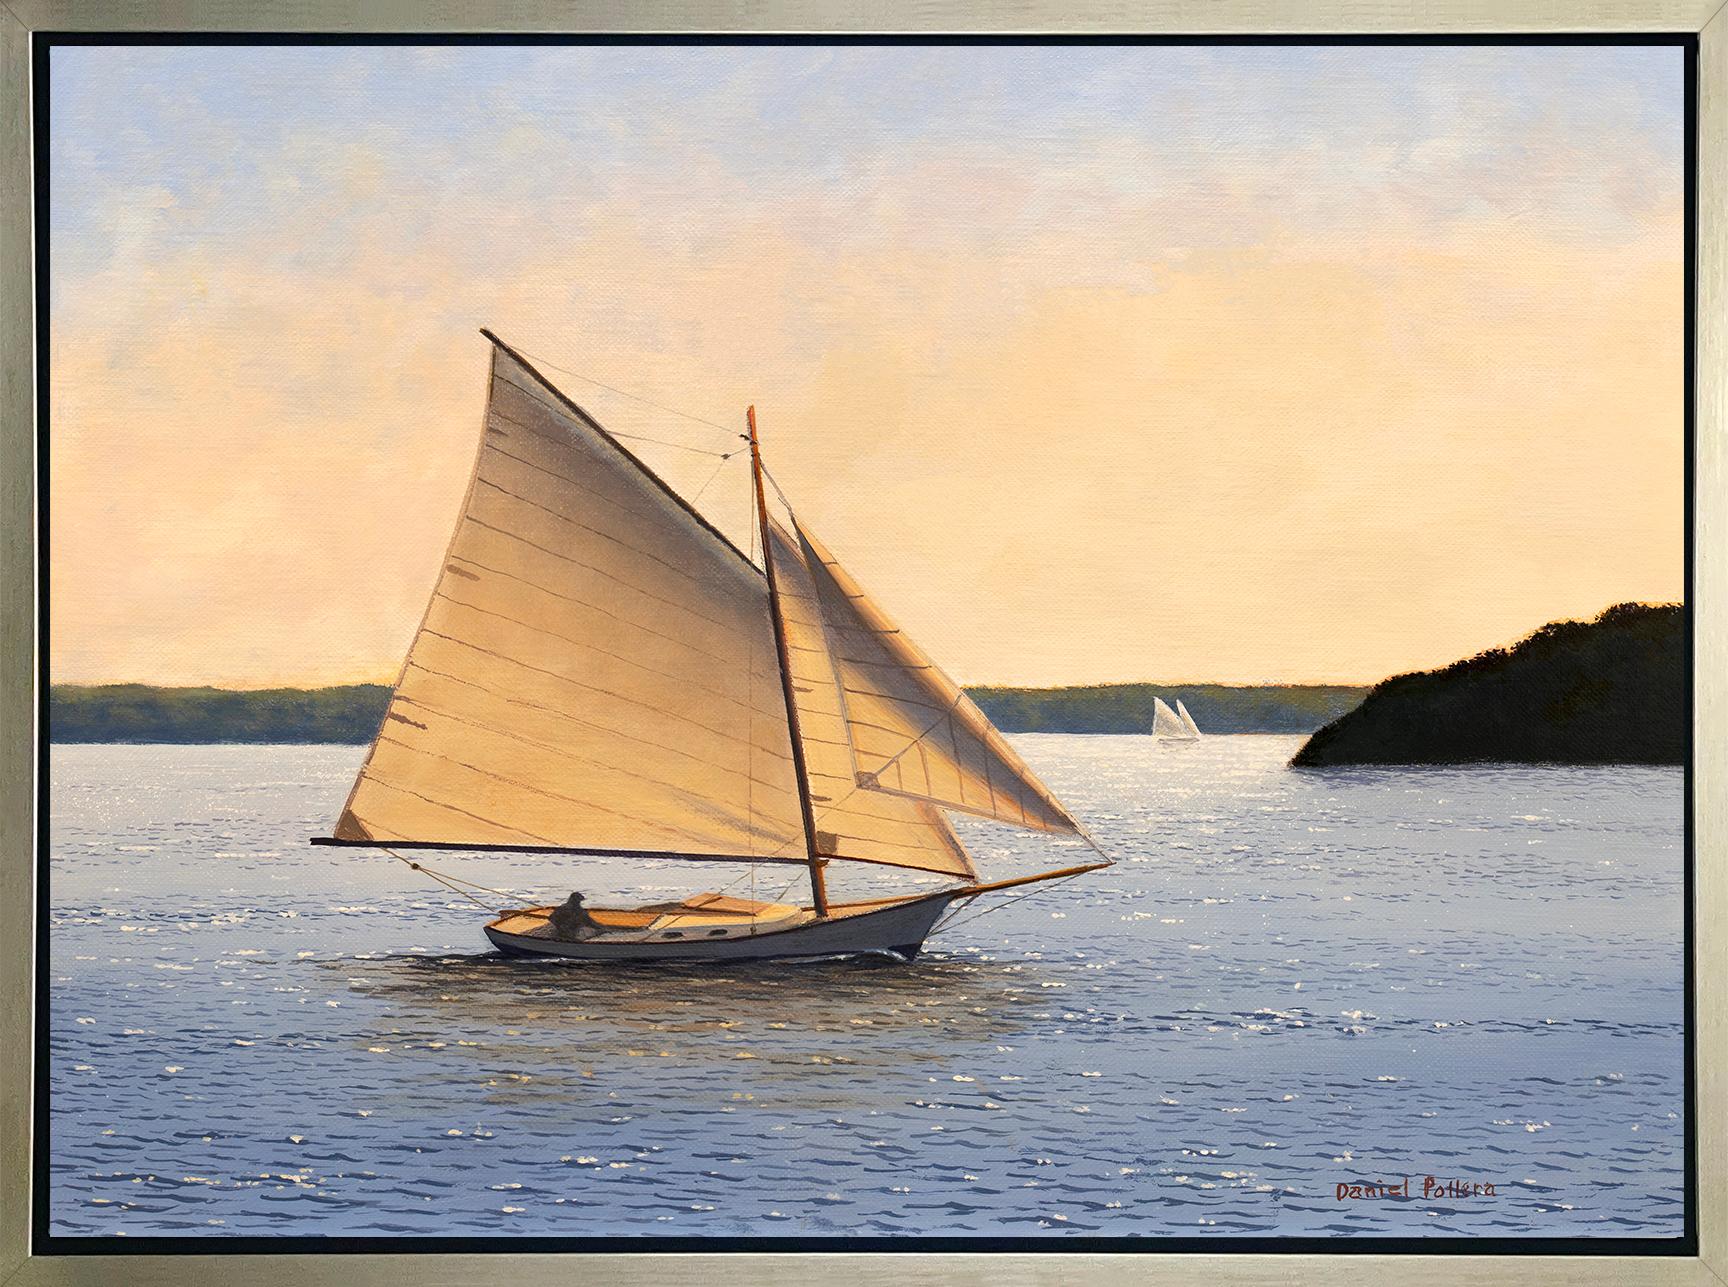 Daniel Pollera Landscape Print – ""Sailing Out to Sea", gerahmter Giclee-Druck in limitierter Auflage, 36 Zoll x 48 Zoll